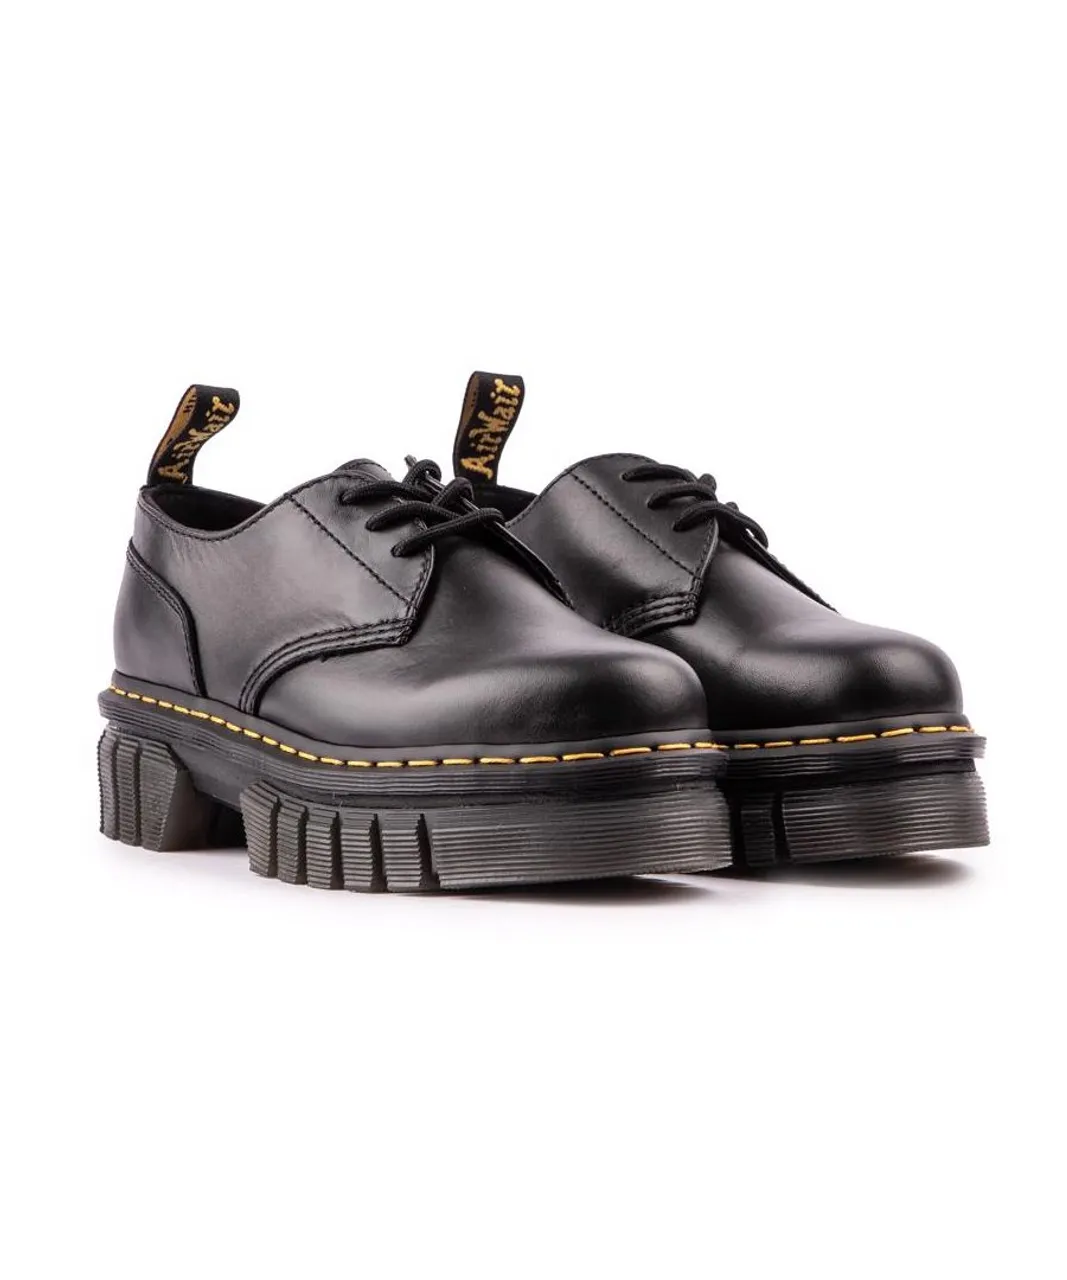 Dr Martens Womens Audrick 3-eye Shoes - Black Leather